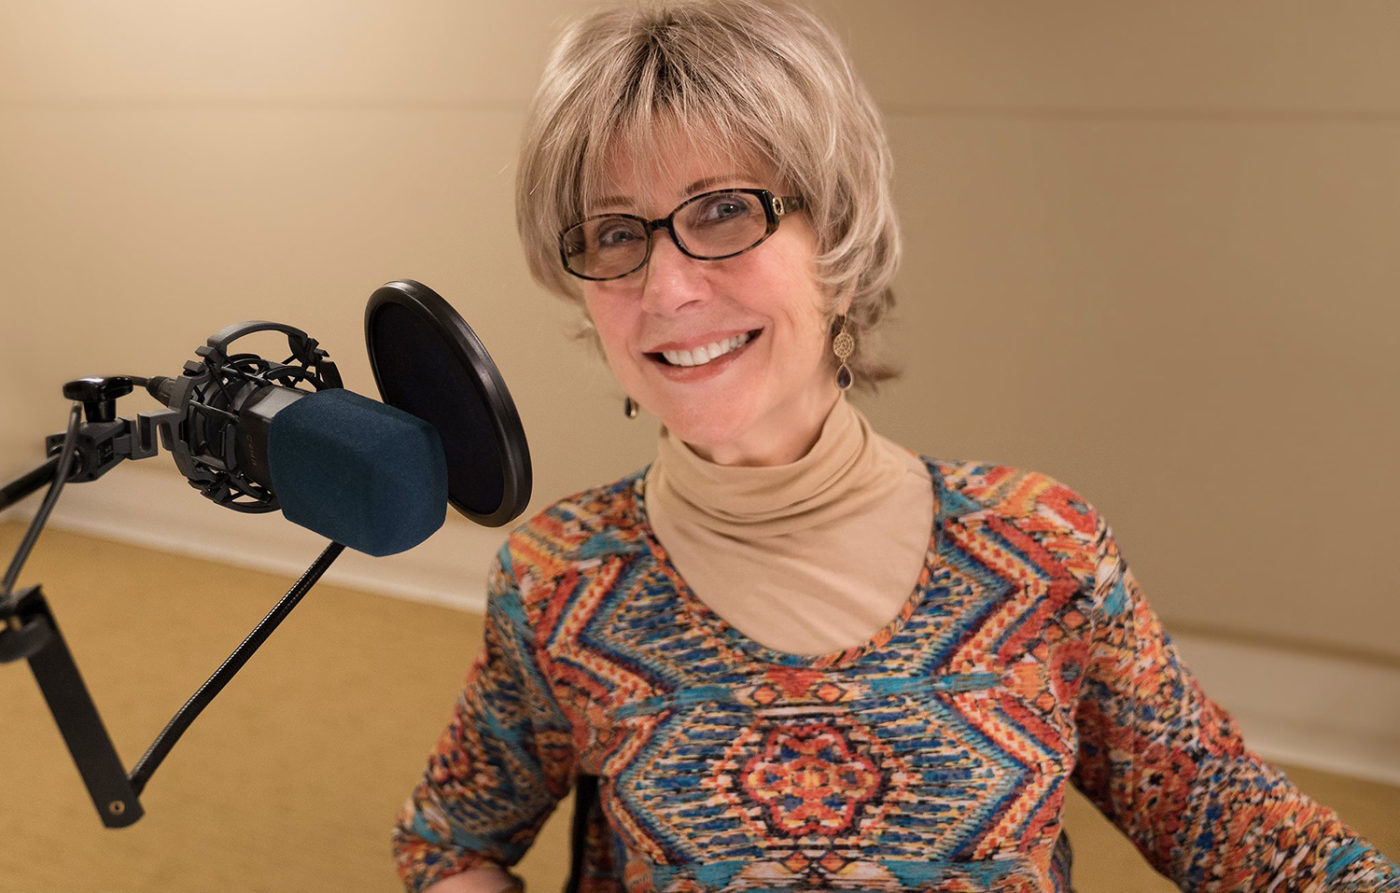 Join us for a special interview with Joni Eareckson Tada, where she talks about suffering and dealing with hardship.